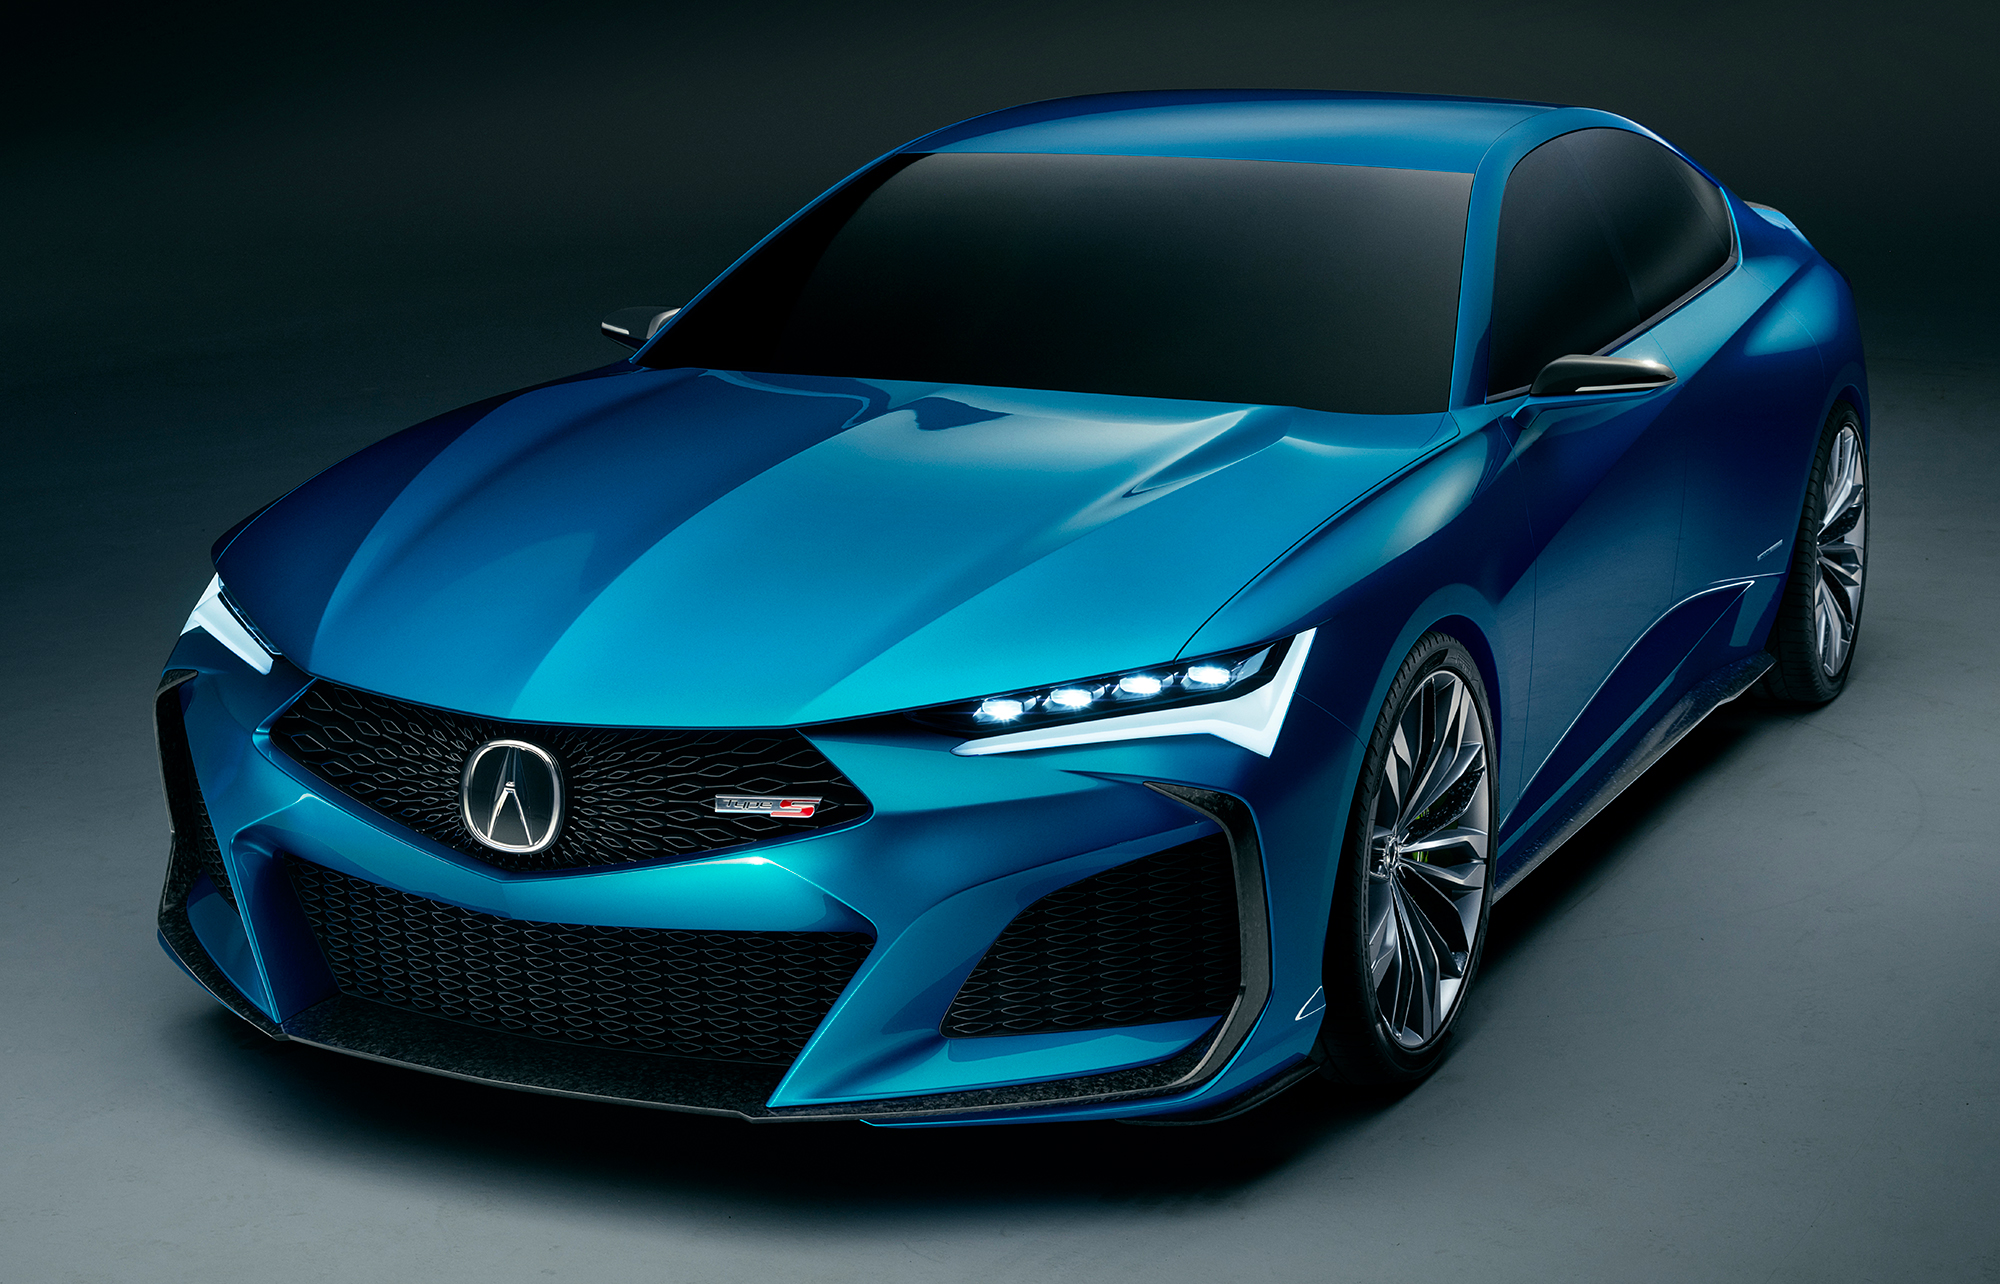 Acura's anime campaign aims to reach new generations | Ad Age